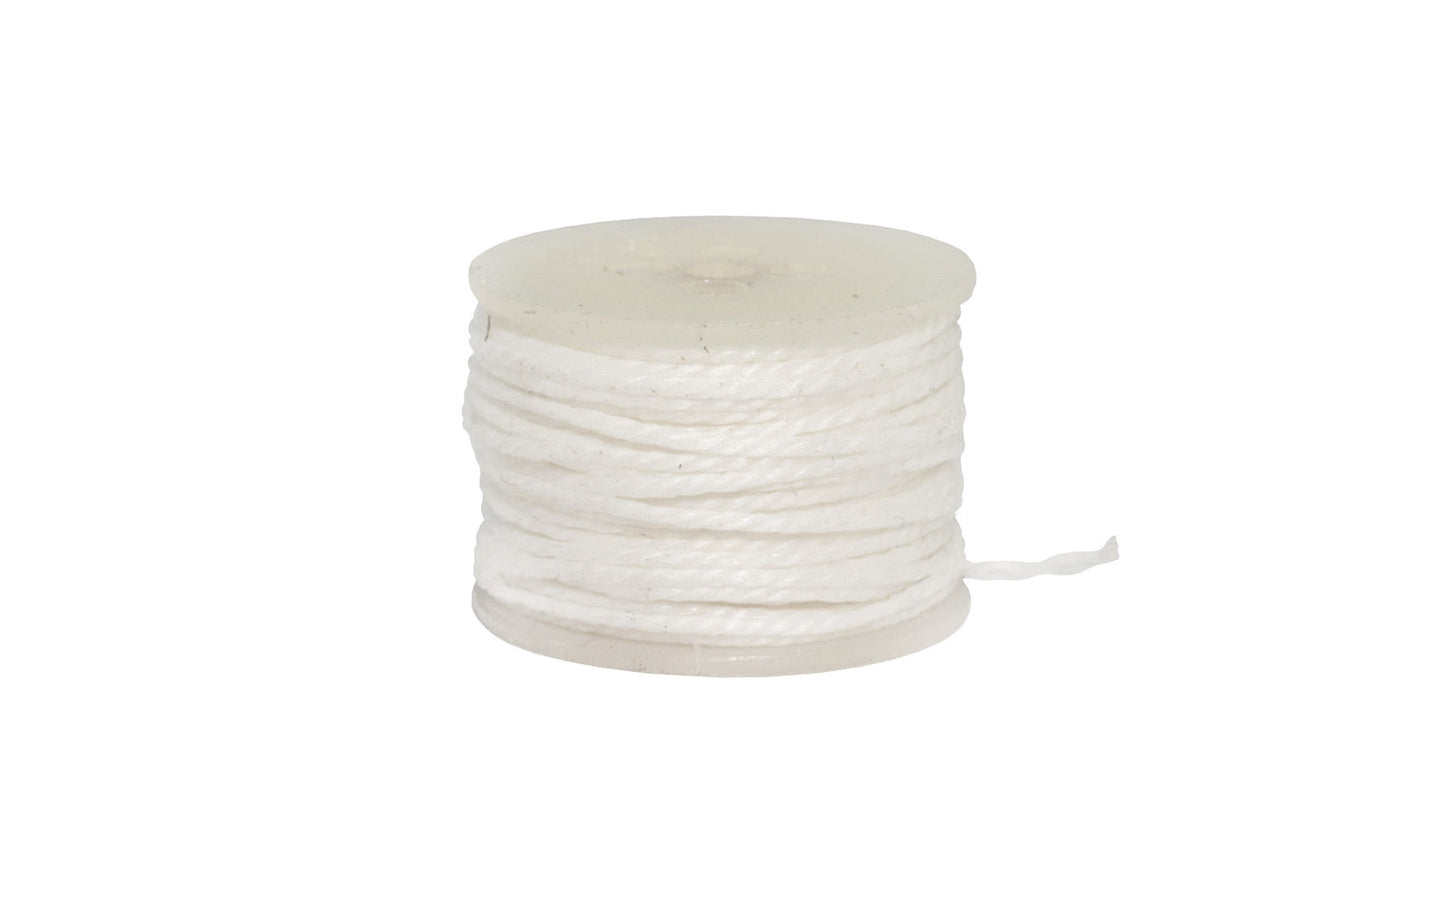 CS Osborne Waxed White Thread ~ 12-1/2 Yards Length - 413R W - Made in USA - Excellent for sewing & repairing leather, canvas, & similar materials - 0.27 mm (0.01") Diameter - White color - Waxed polyester thread - Model No. 413R W ~ 096685621869